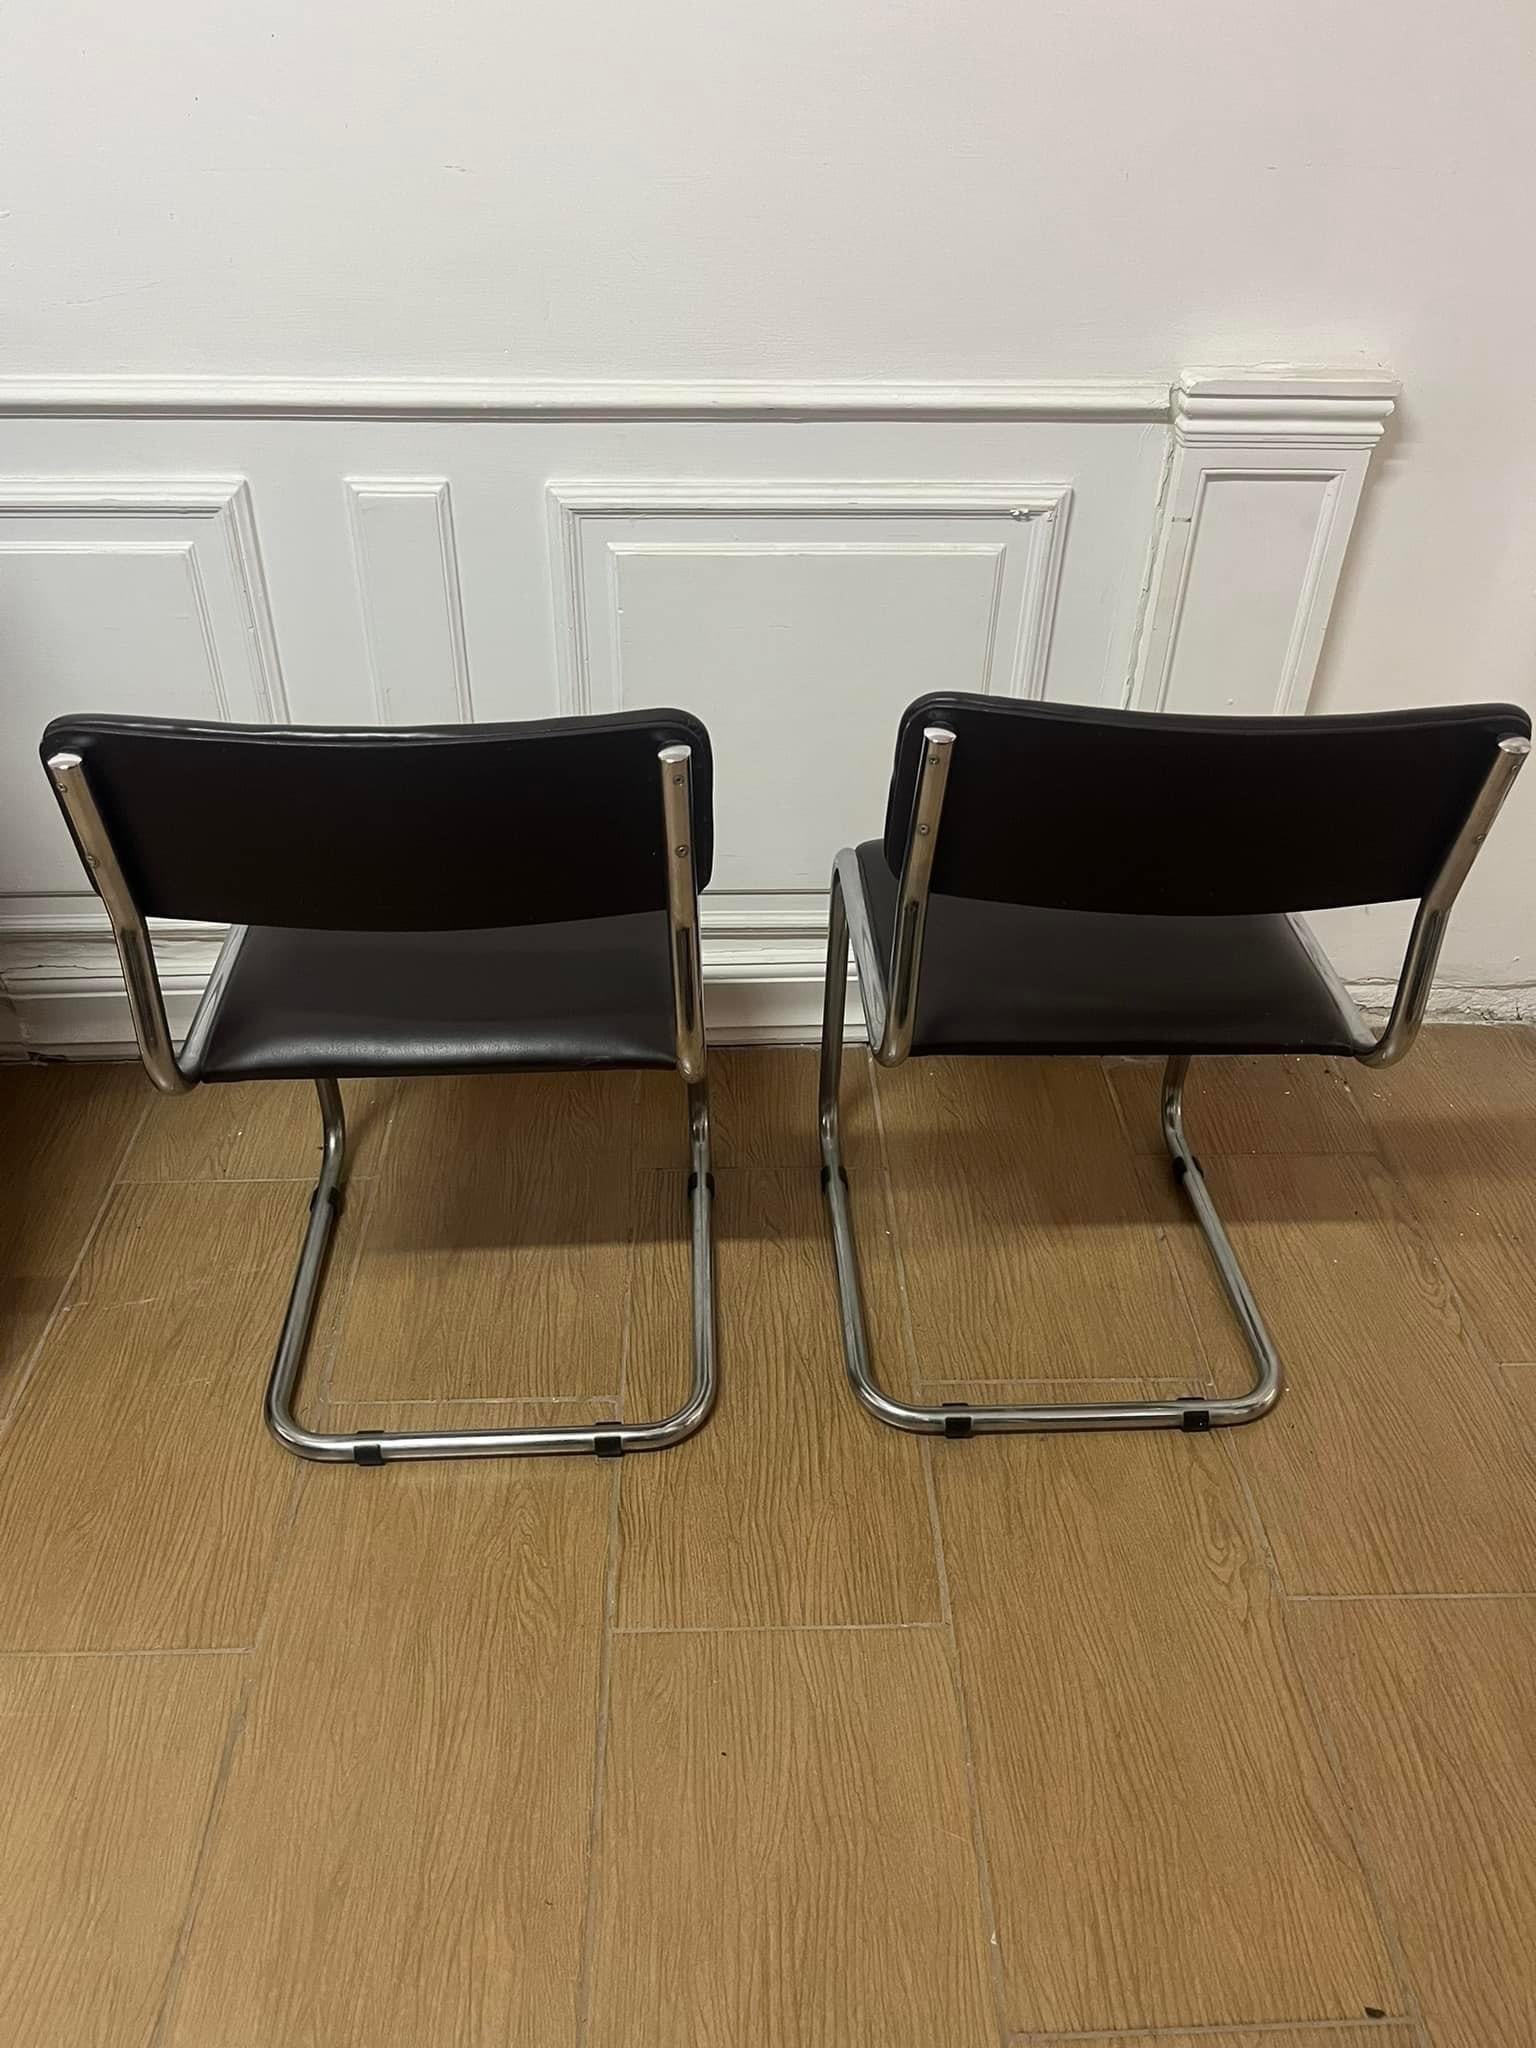 Pair of Bauhaus Chairs In Good Condition For Sale In Nocera Inferiore, IT